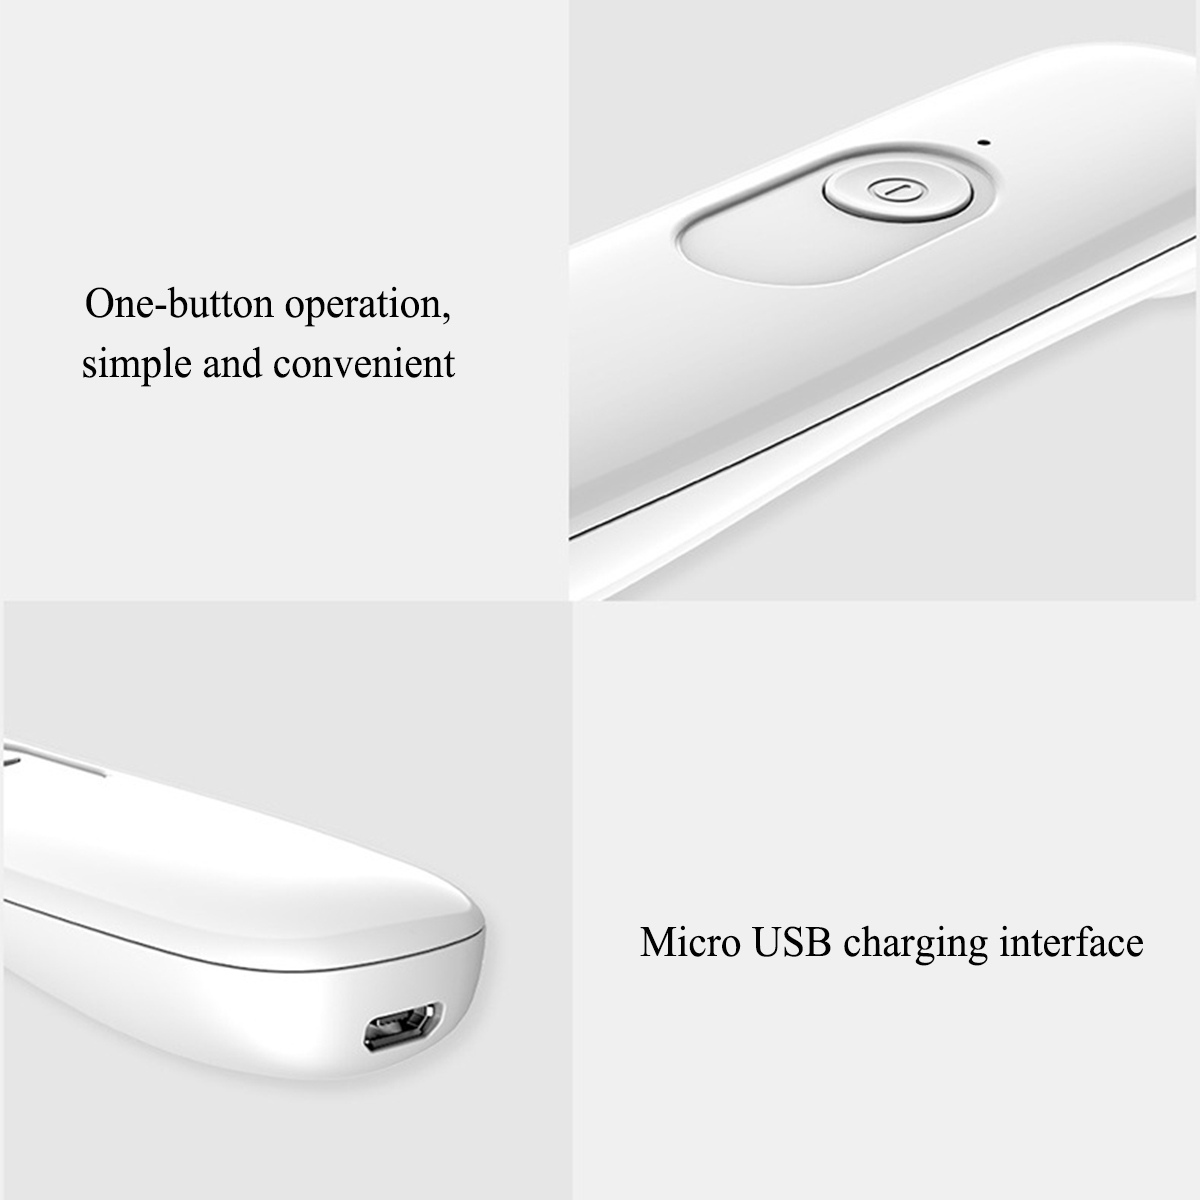 999-Sterilization-Rate-USB-Rechargeable-Mini-Portable-Ultraviolet-Handheld-Disinfection-Lamp-UVC-Ger-1700558-9